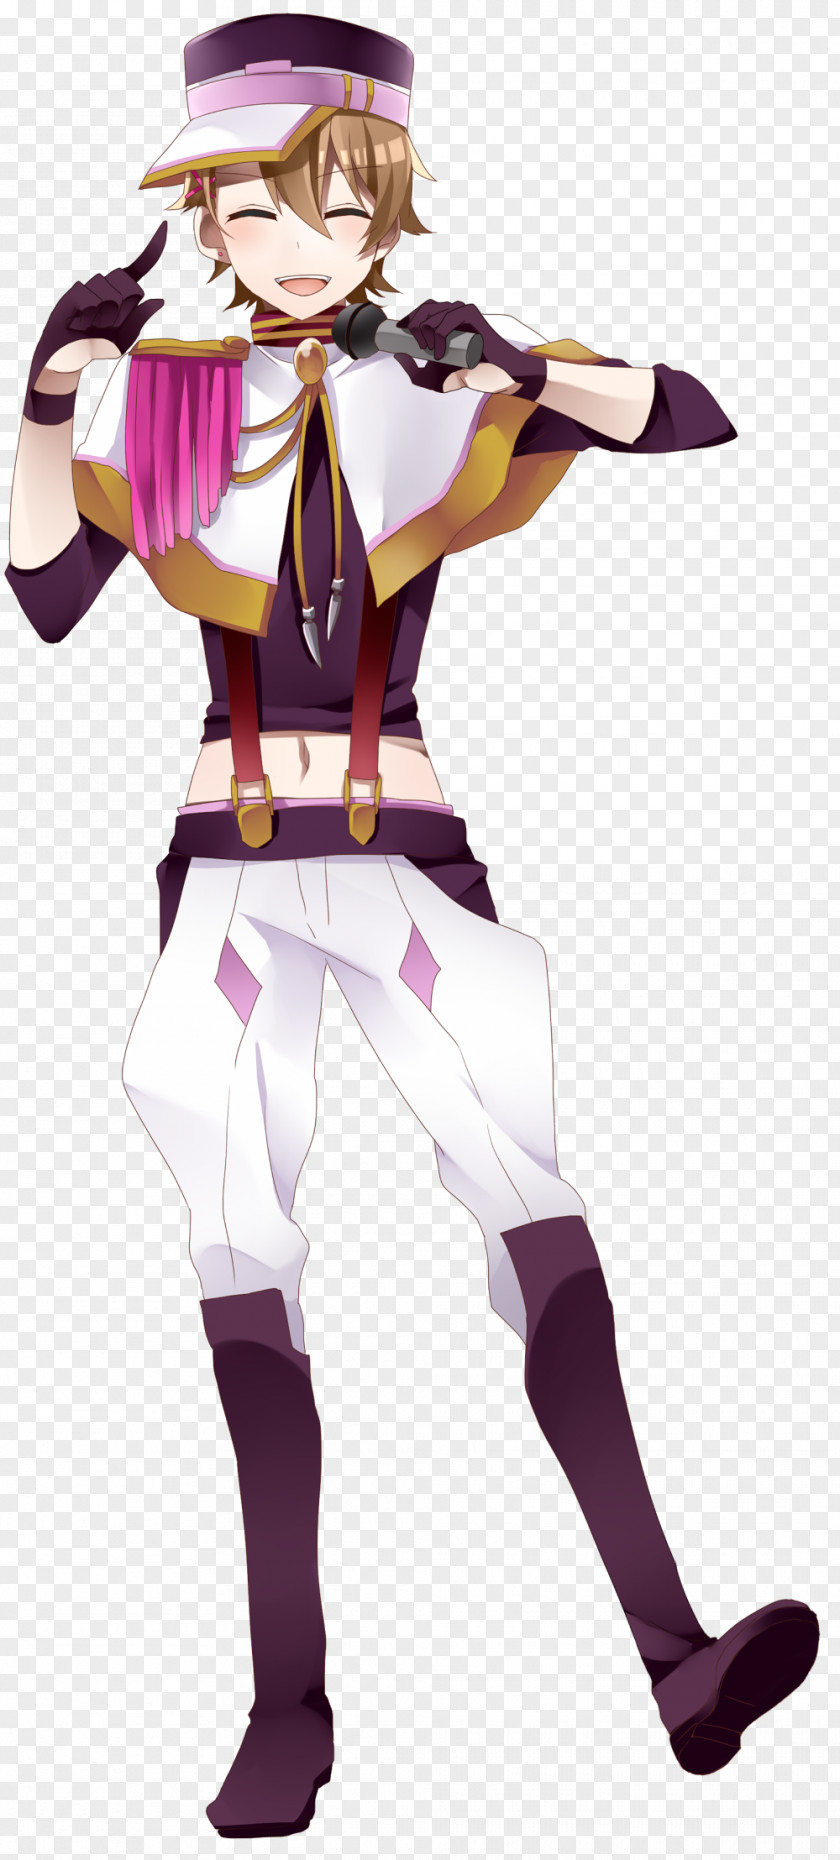 Singer Niconico Megurine Luka Anime Animation PNG Animation, clipart PNG